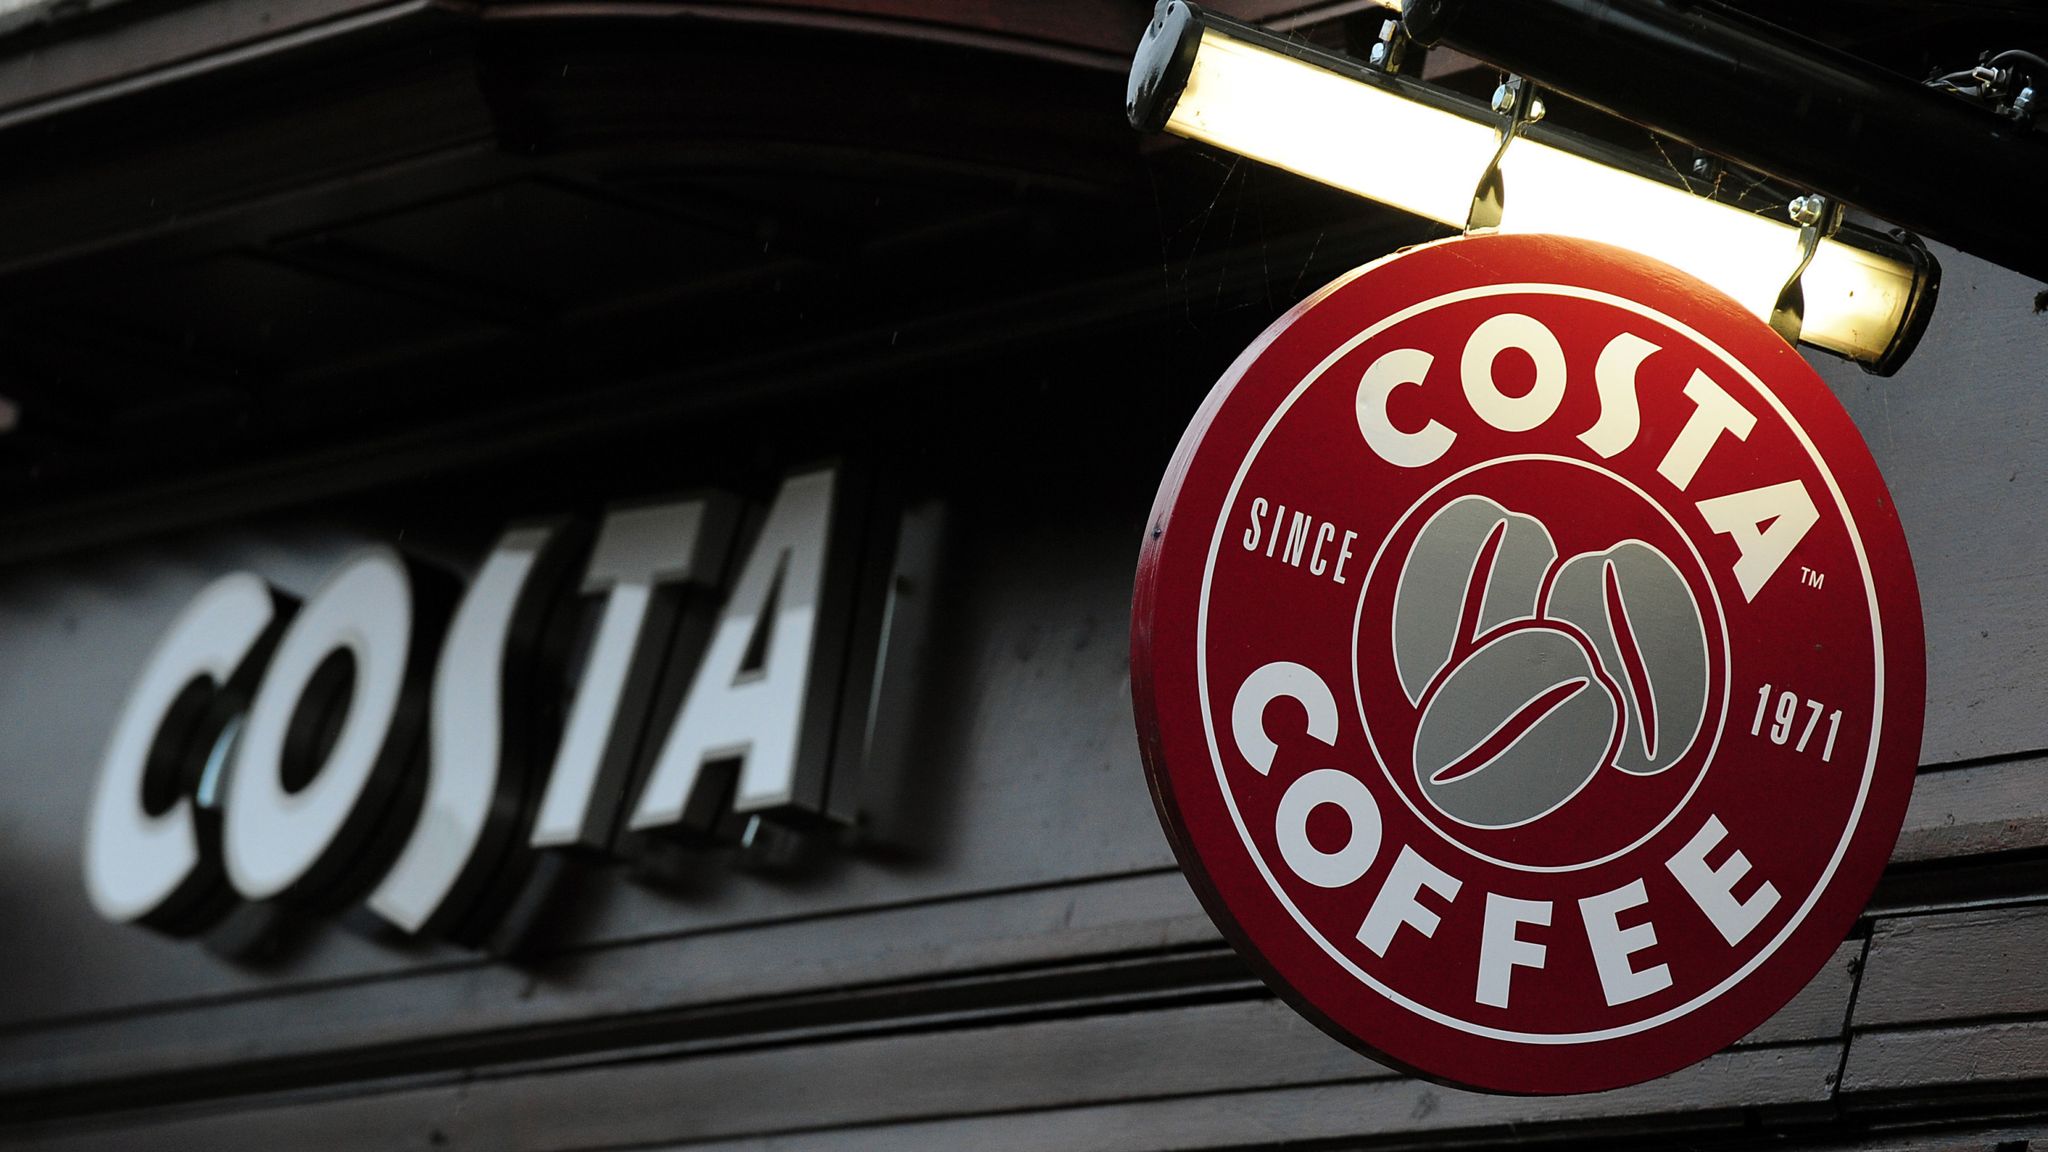 Download Whitbread To Sell Costa Coffee Chain To Coca Cola For 3 9bn Business News Sky News